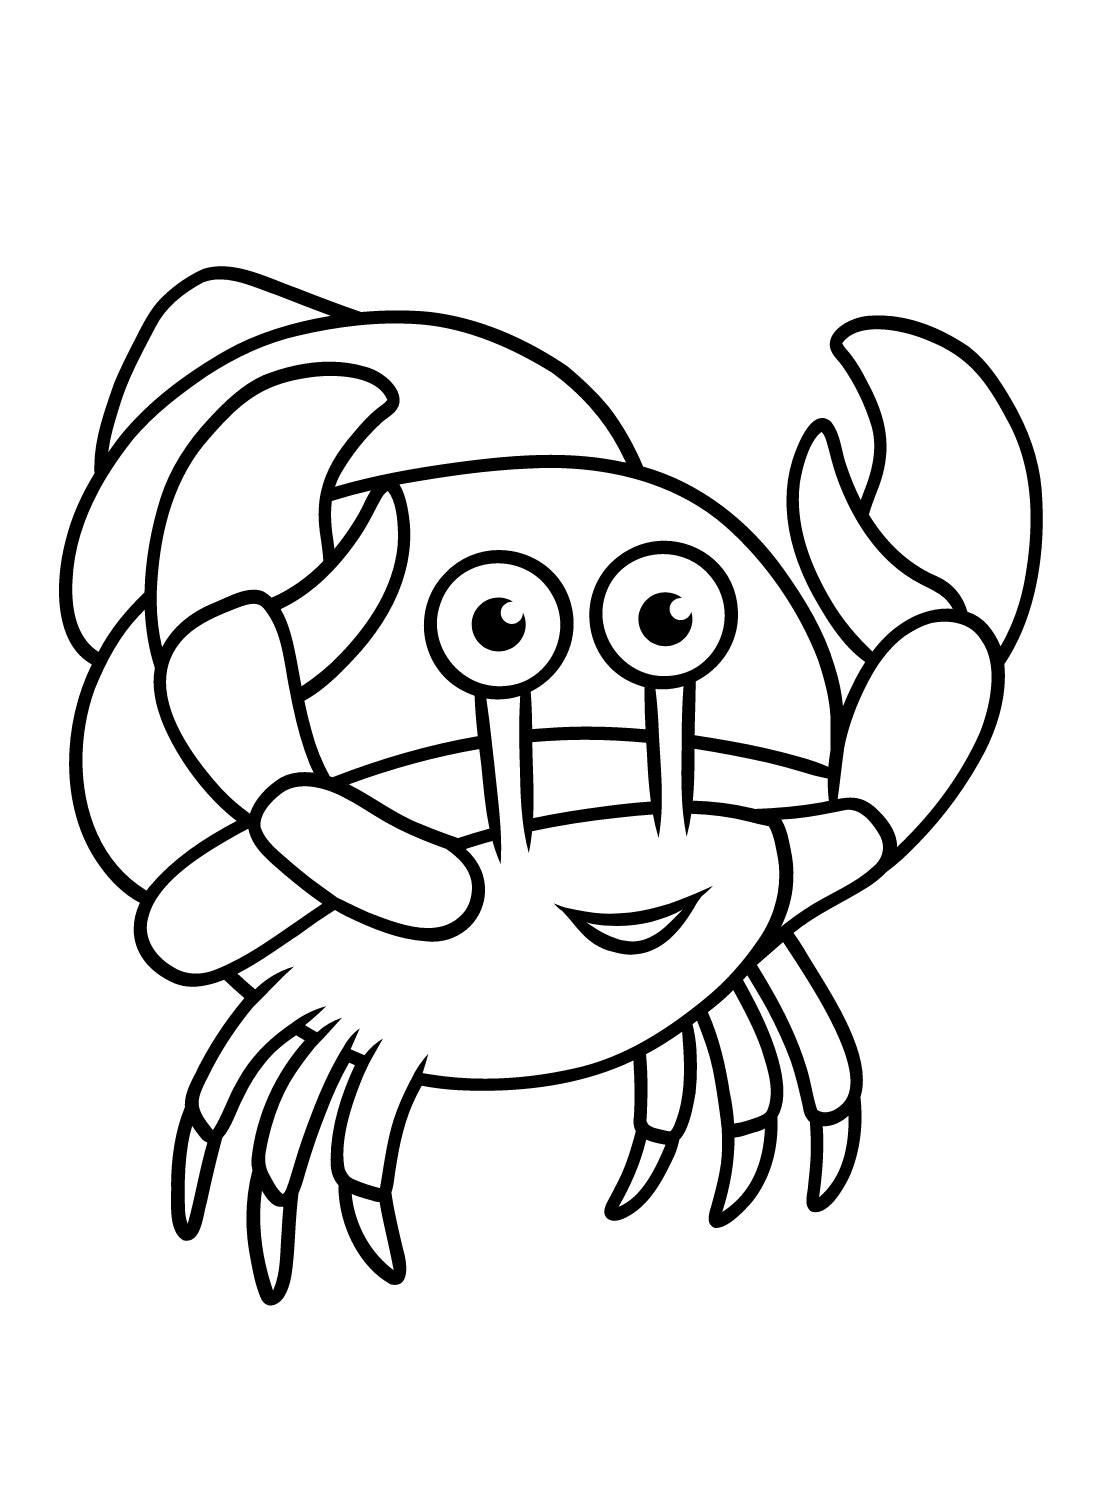 Cute Hermit Crab Coloring Page